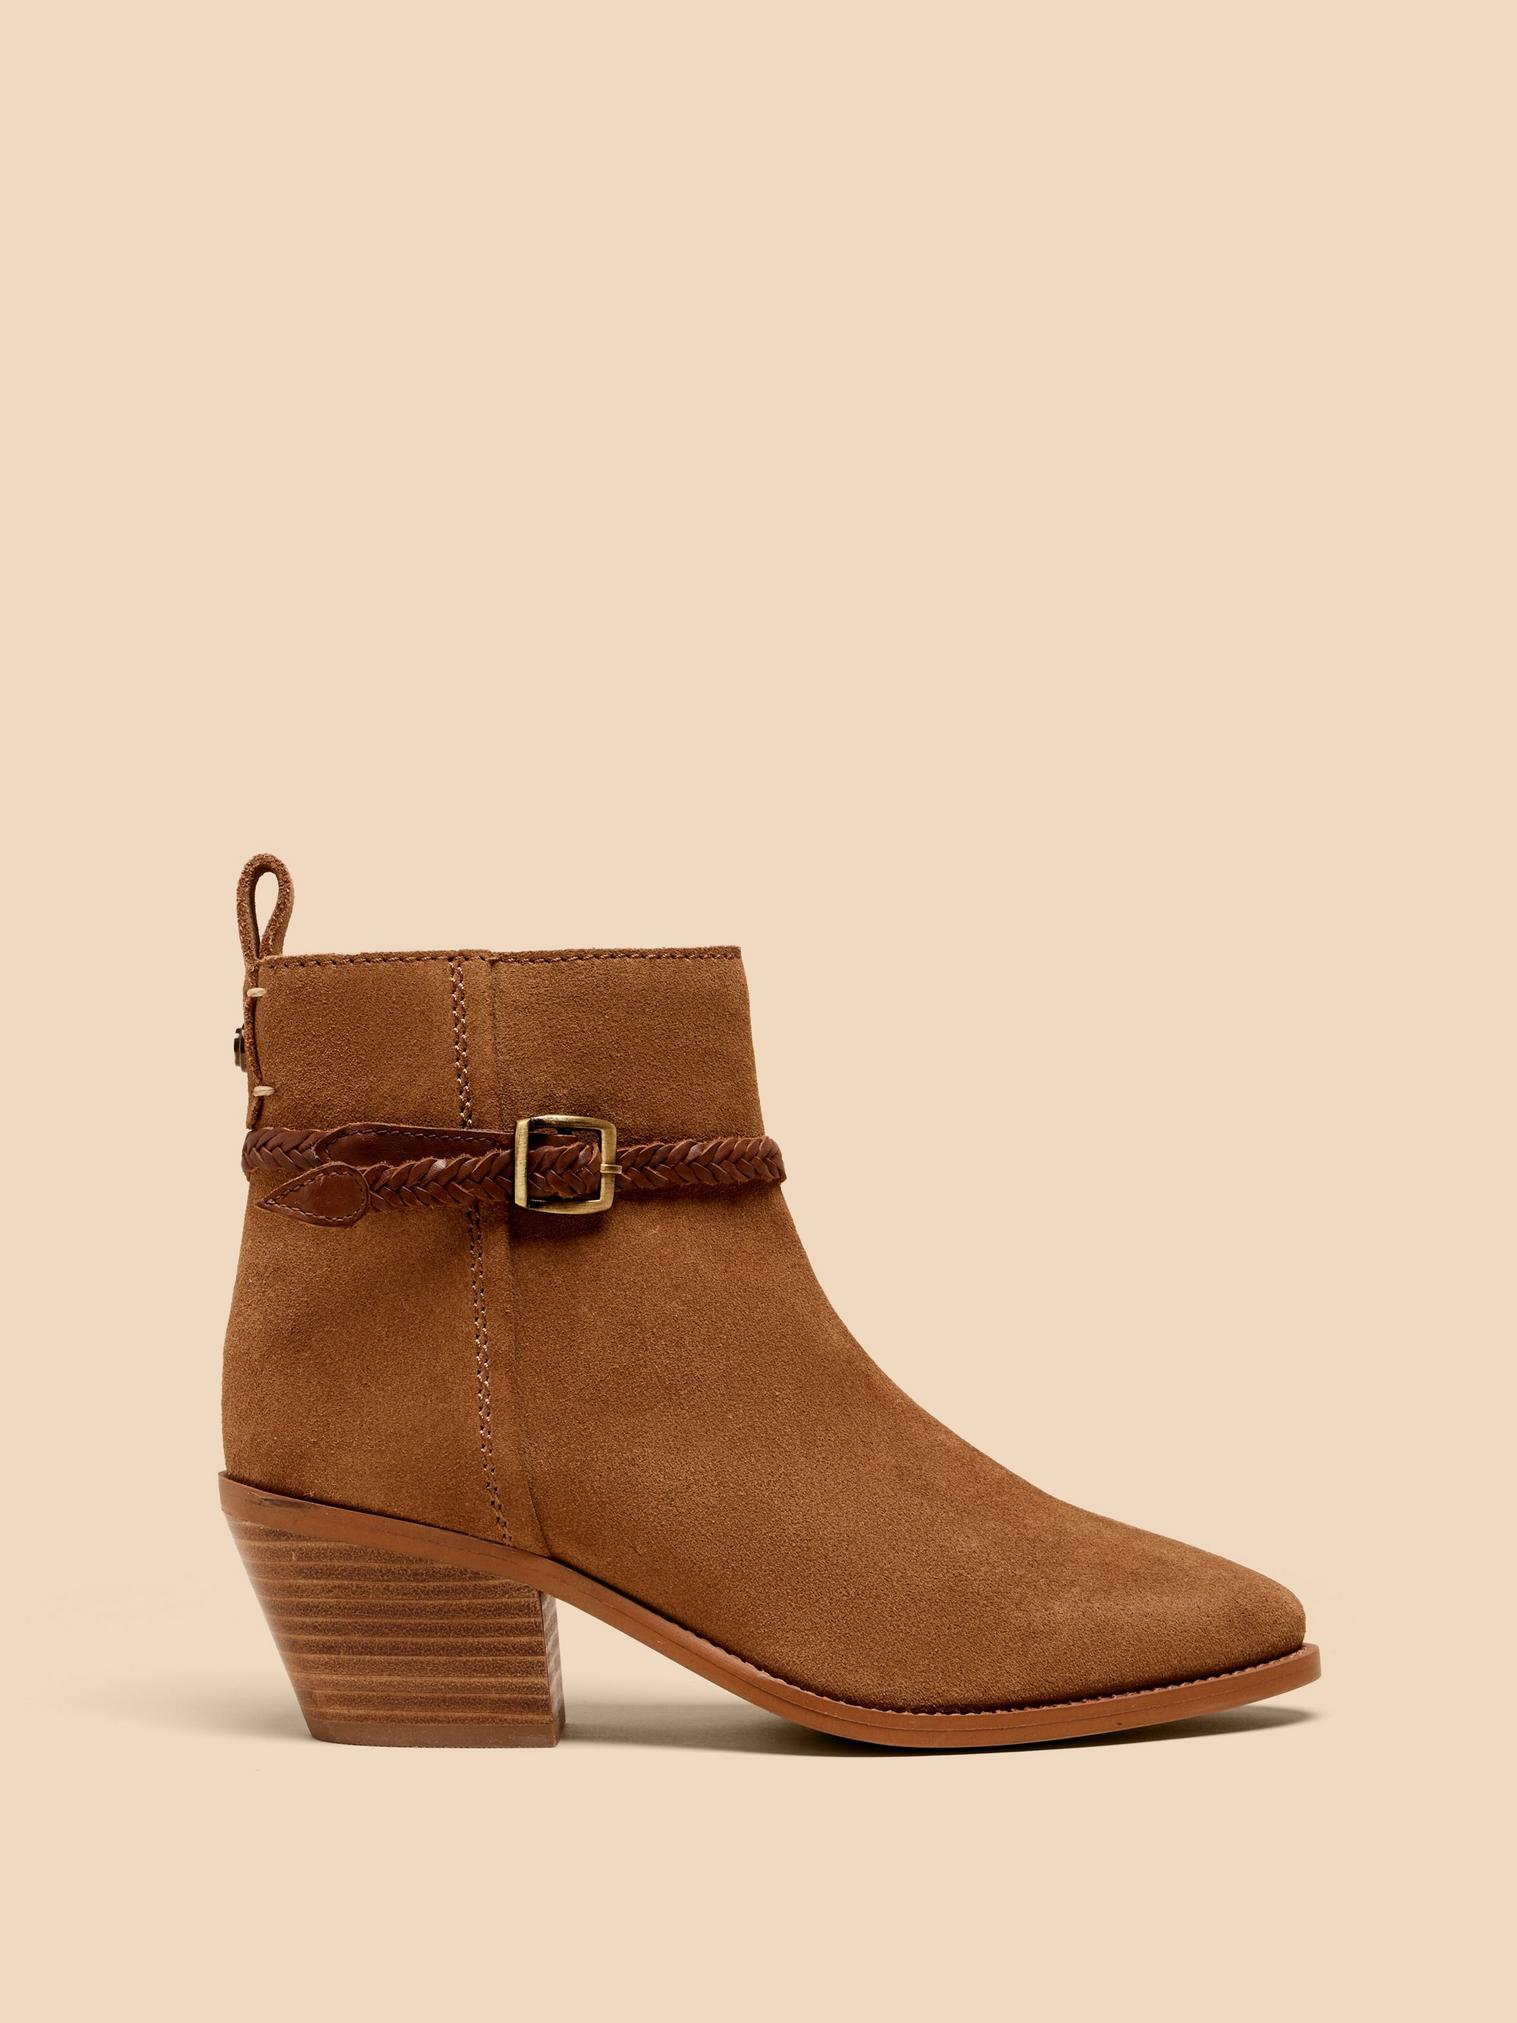 Peony Suede Plait Strap Boot in MID TAN - MODEL FRONT